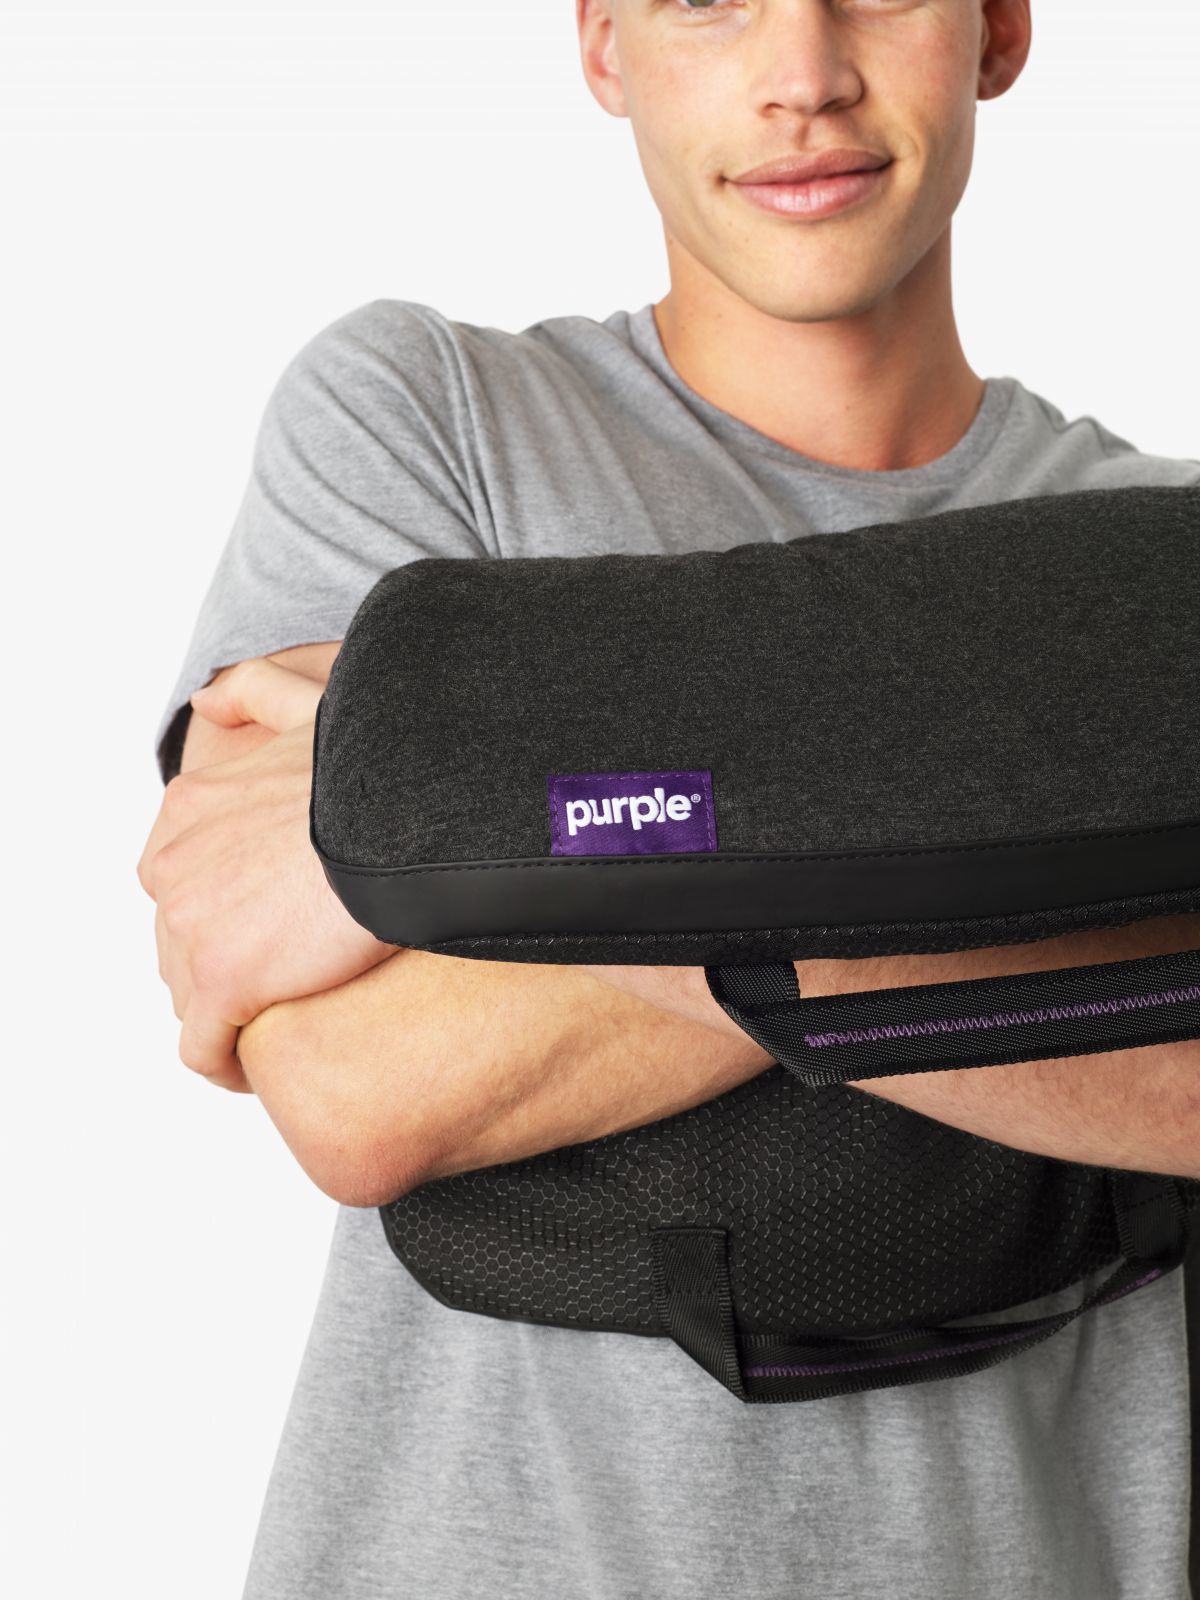 The Royal Purple Seat Cushion - Store Returns and Warehouse